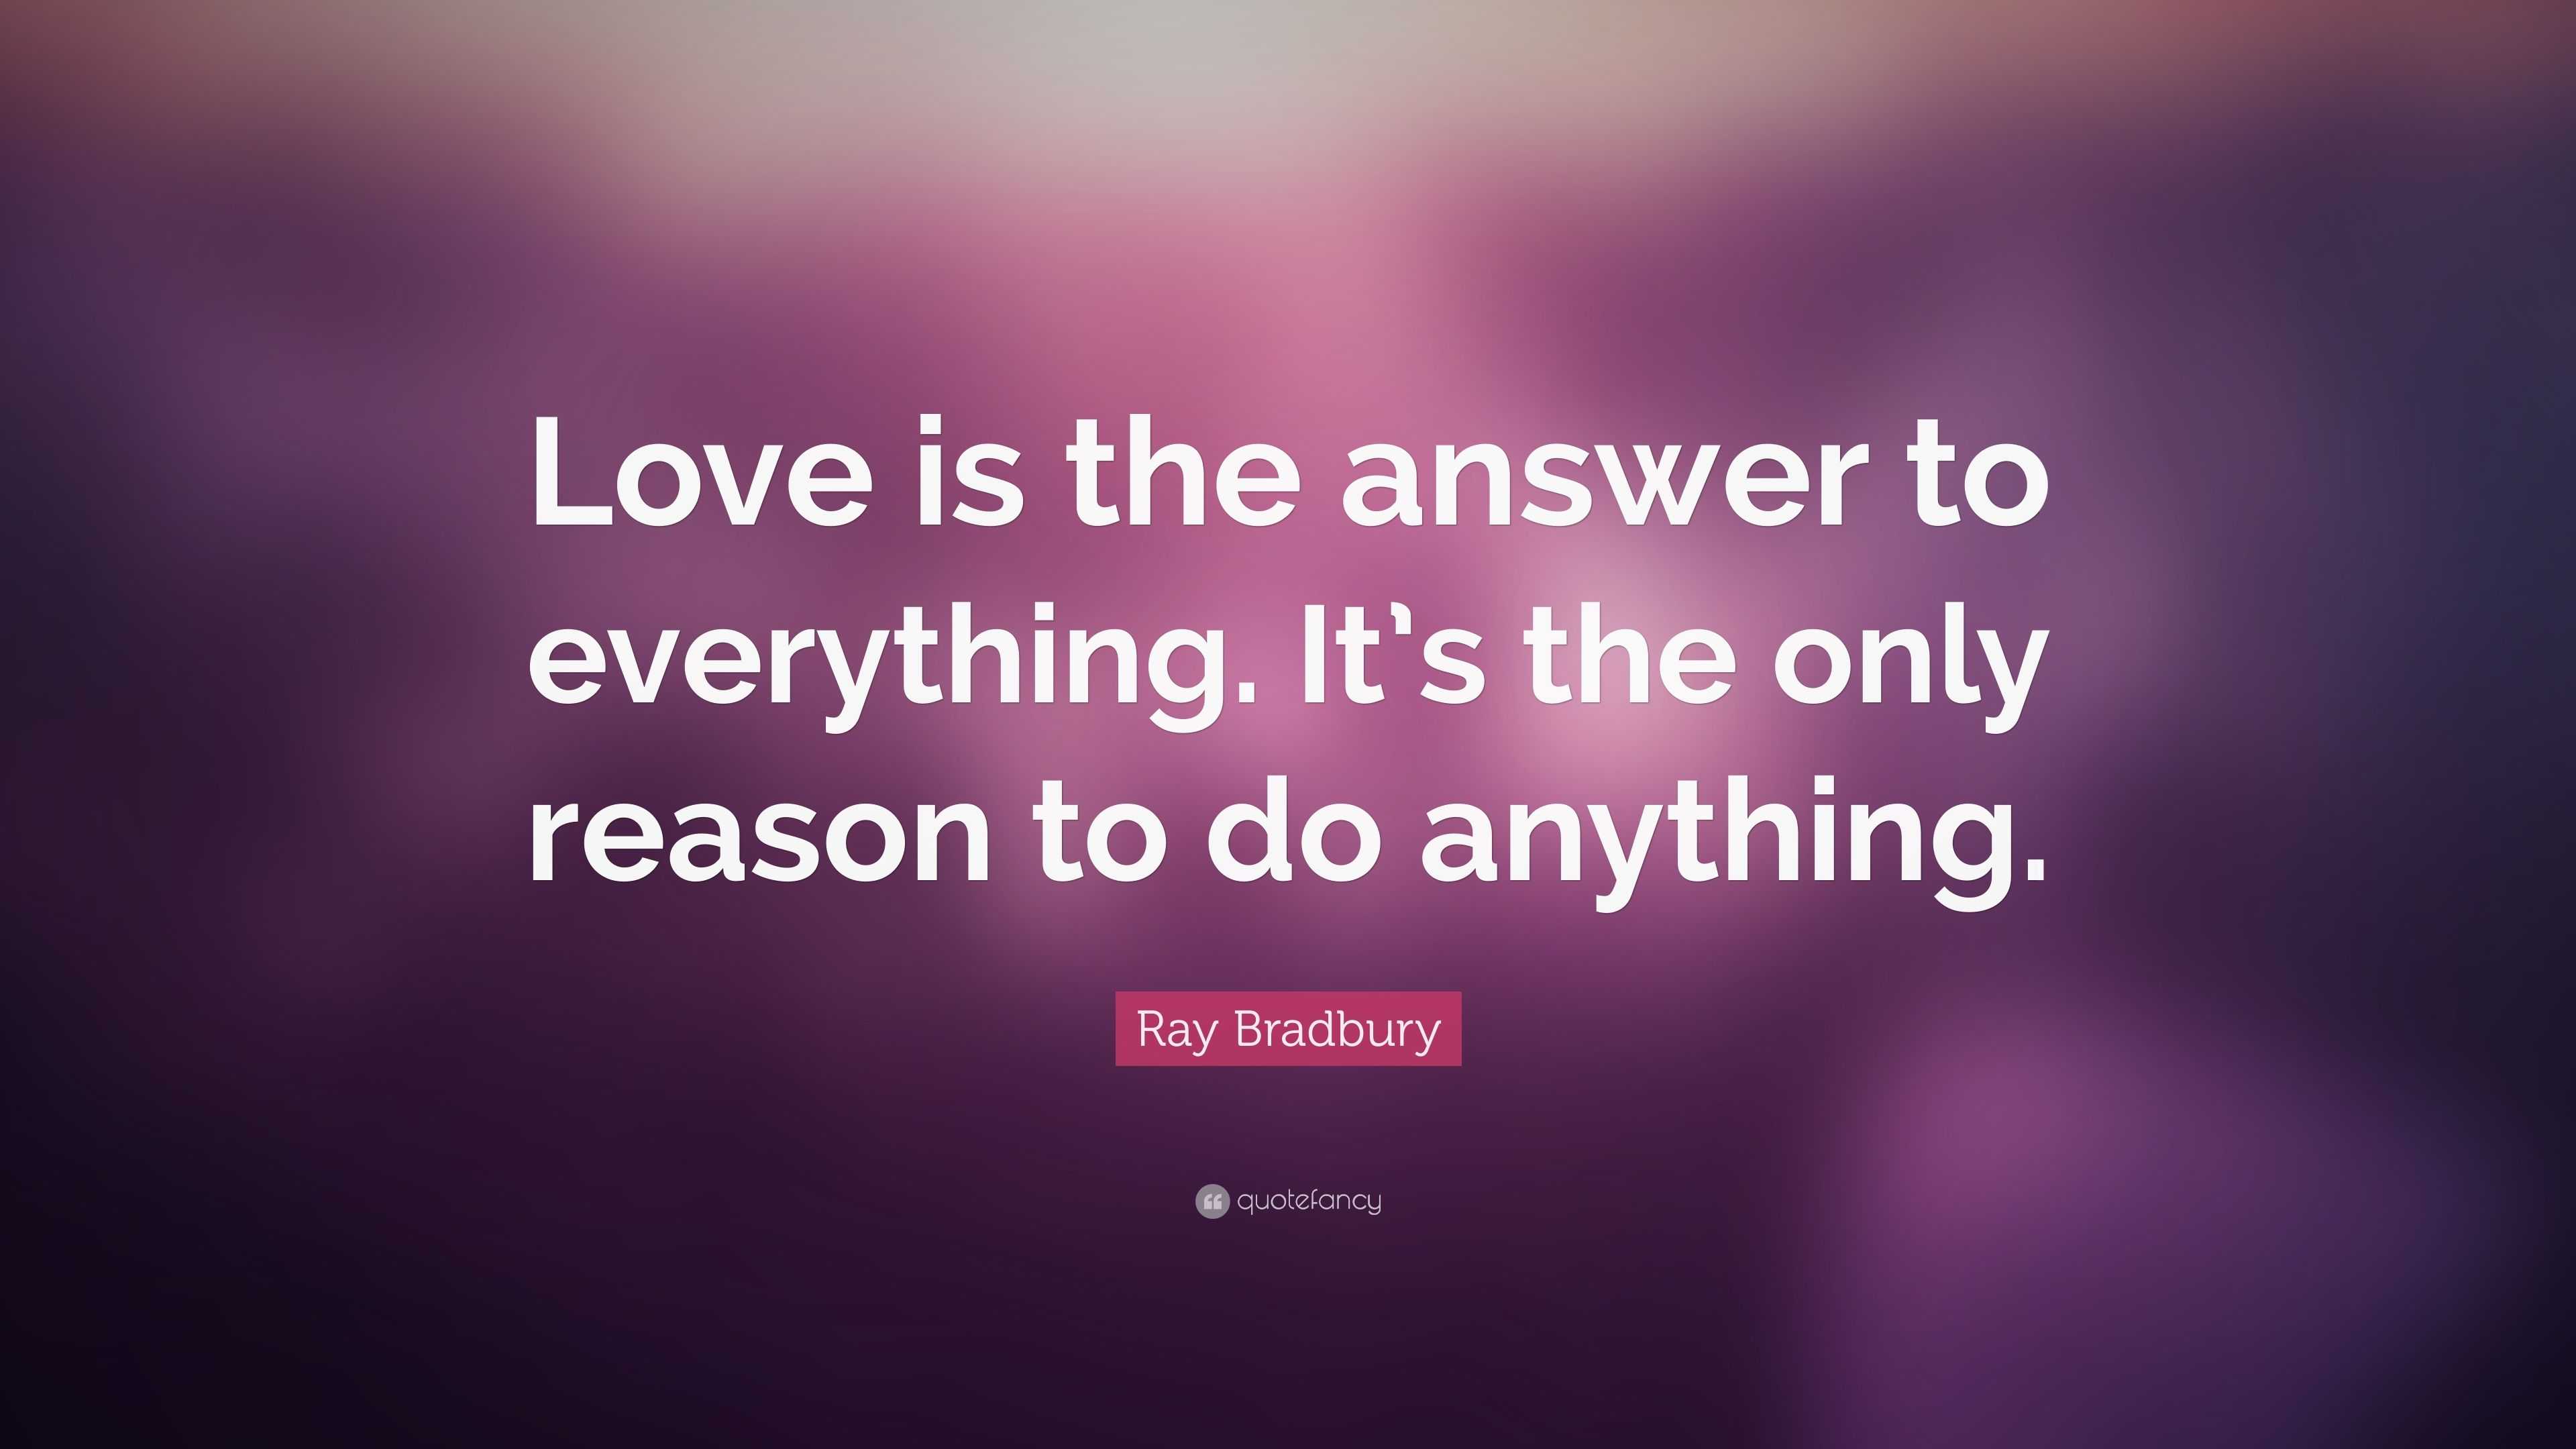 Ray Bradbury Quote: “Love is the answer to everything. It’s the only ...